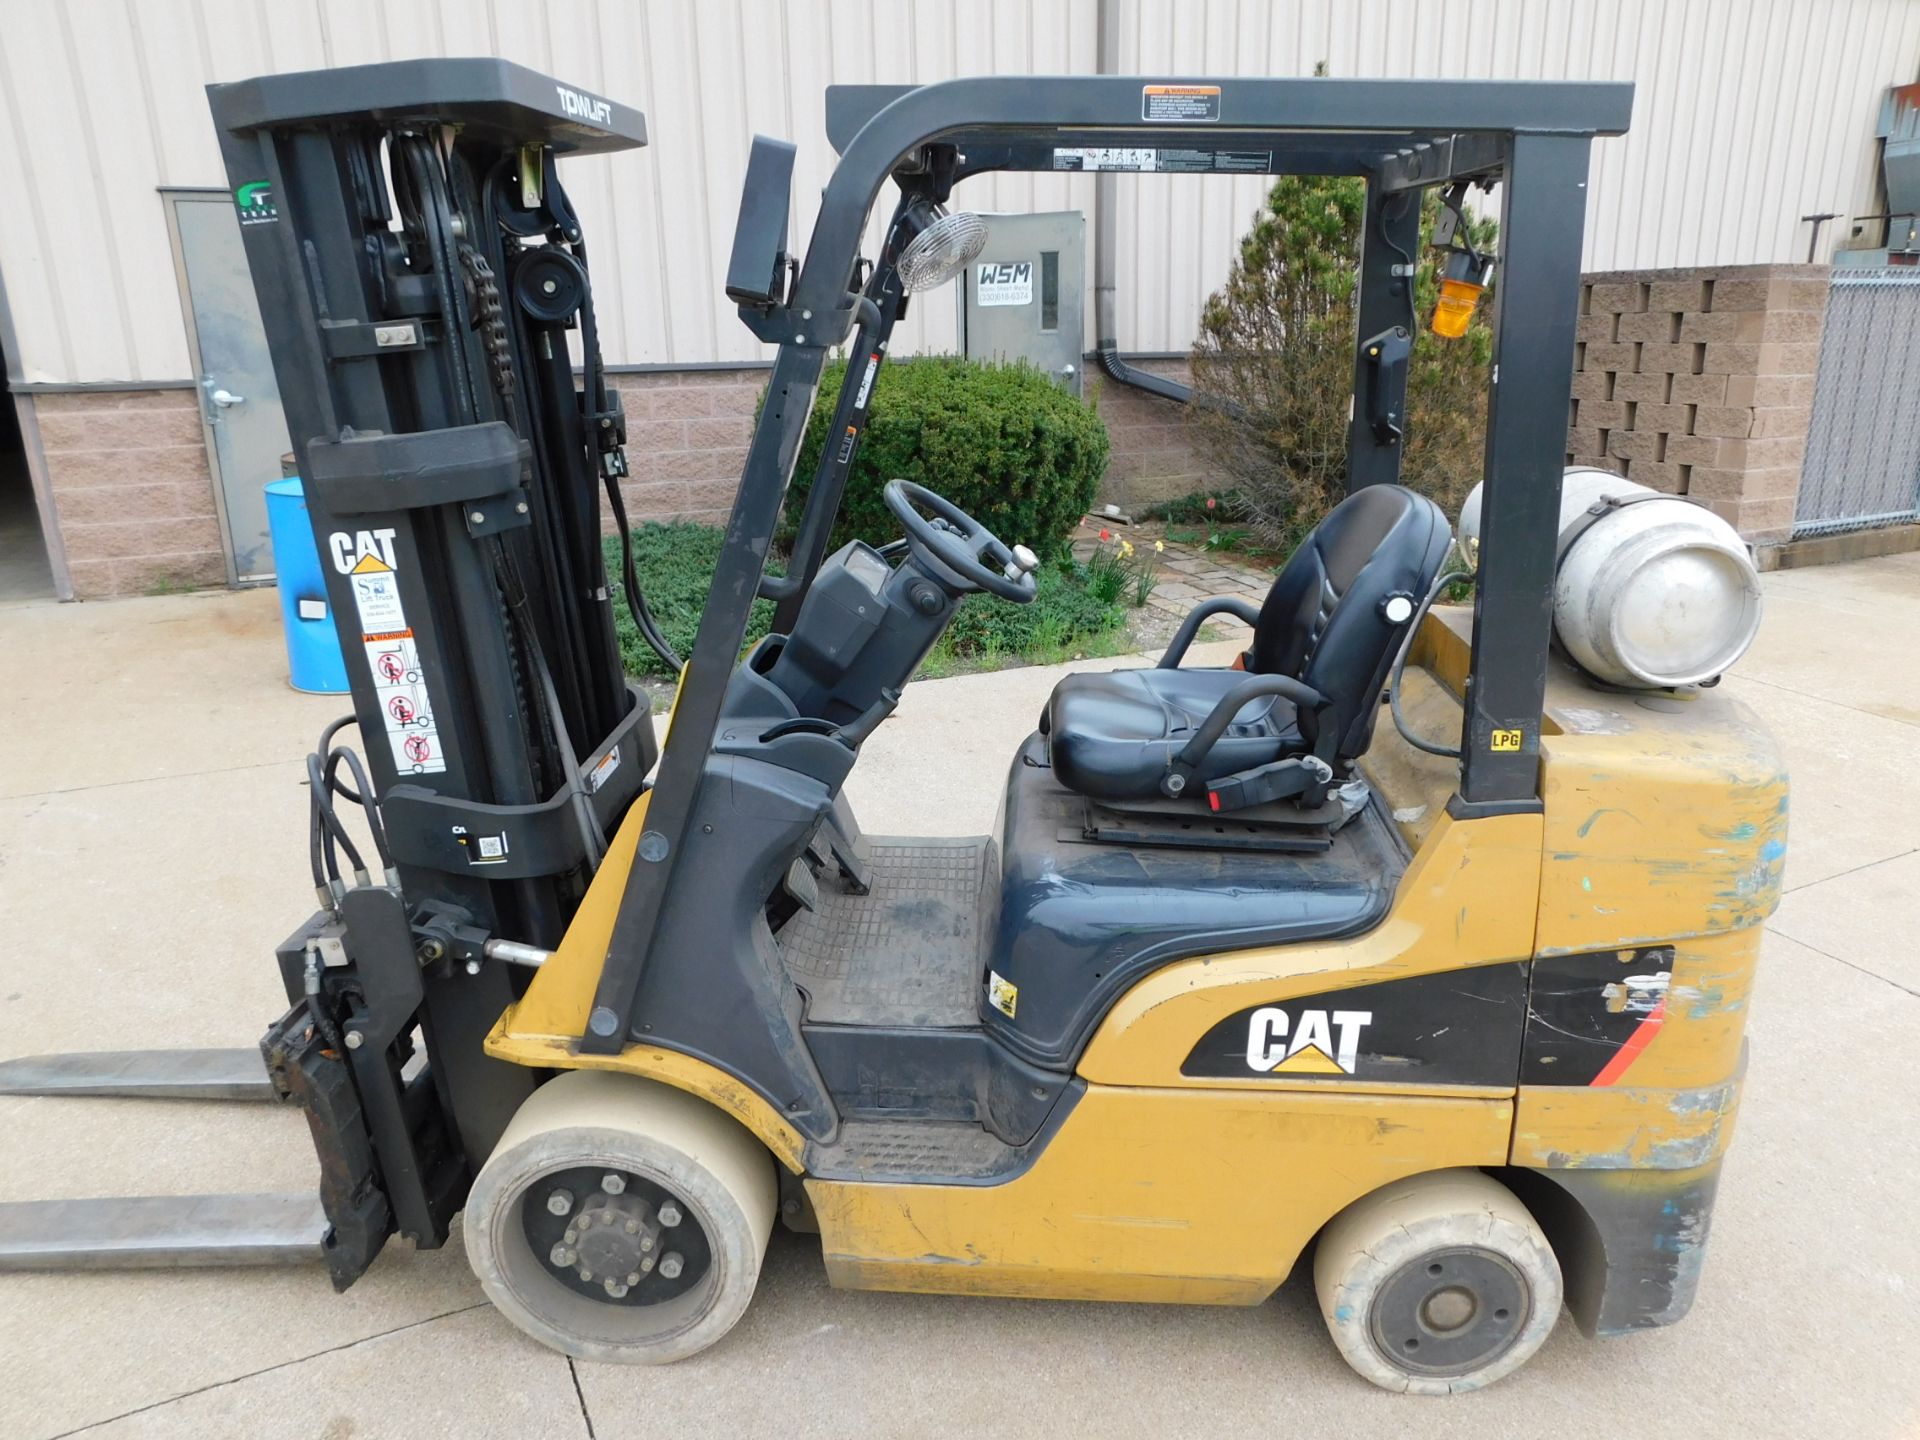 Caterpillar Model 2C6000 Forklift, SN AT83F40876, 4,500 lb cap., LP, Non-Marking Hard Tires, 3-Stage - Image 9 of 21